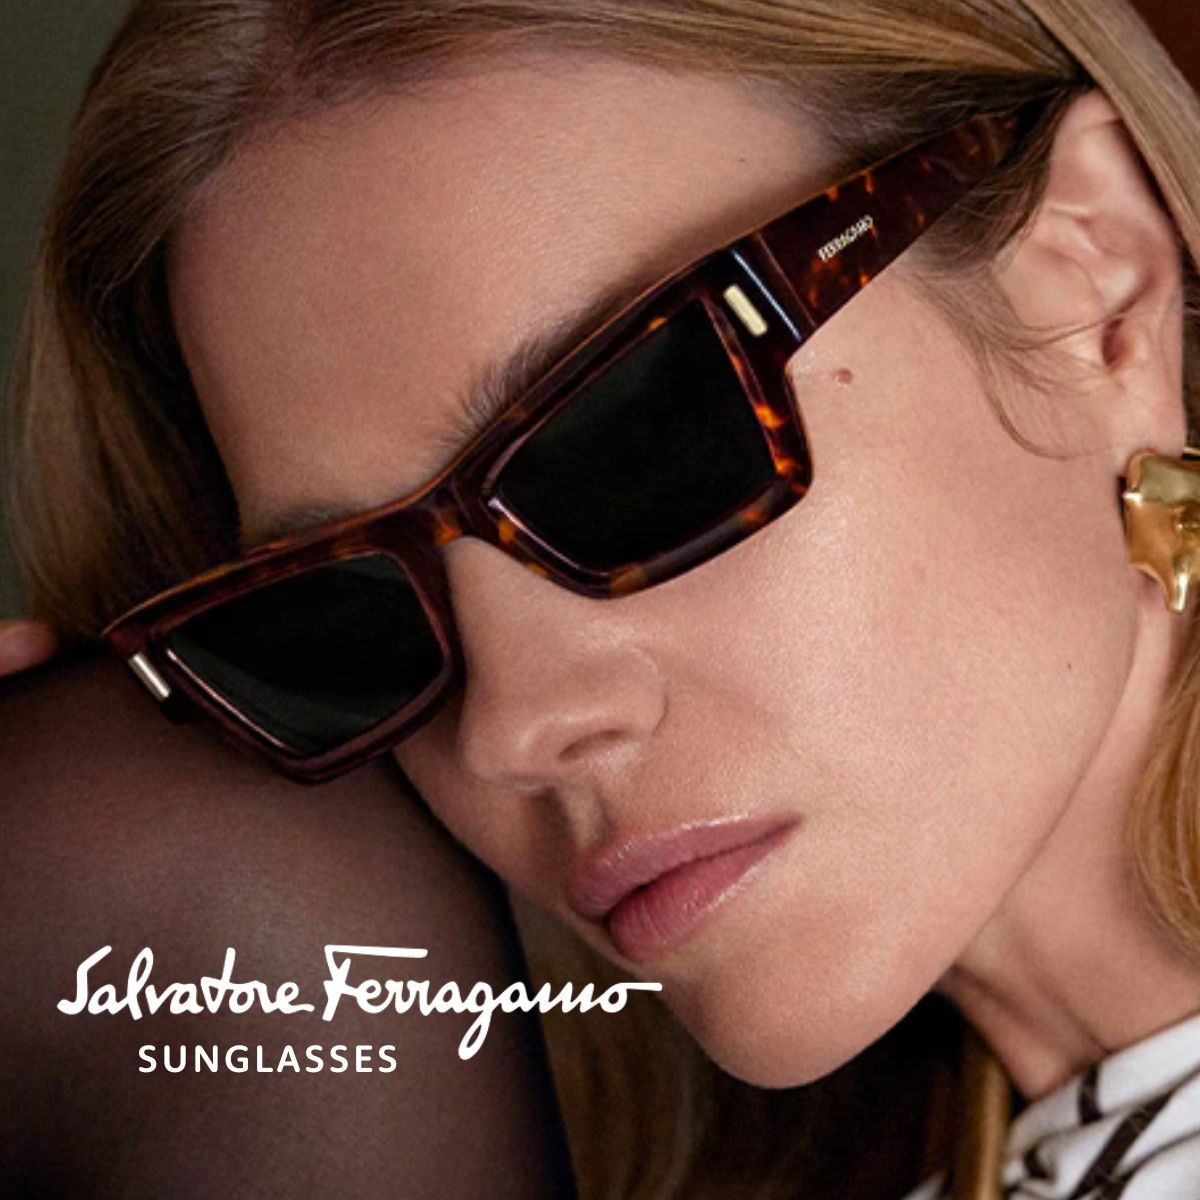 "Discover designer Salvatore Ferragamo sunglasses at Optorium, featuring a wide selection for men and women, including top brands like Prada, for stylish eye protection."